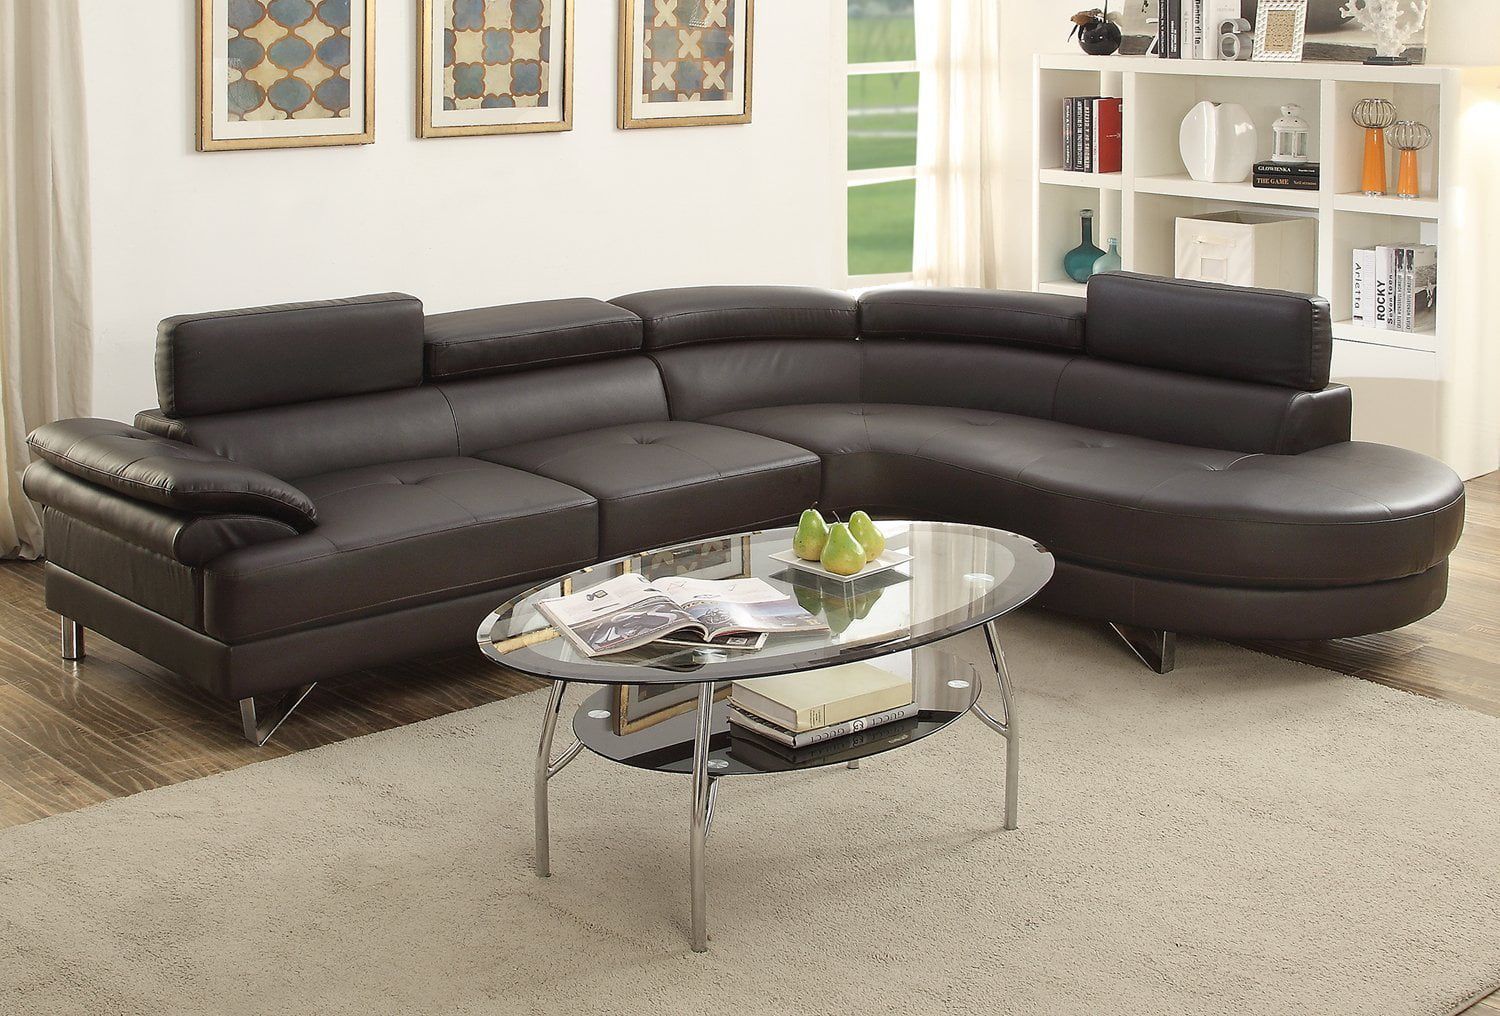 Modern Espresso Faux Leather Sectional Sofa Chaise Set With Flip Up Within Faux Leather Sectional Sofa Sets (Gallery 19 of 21)